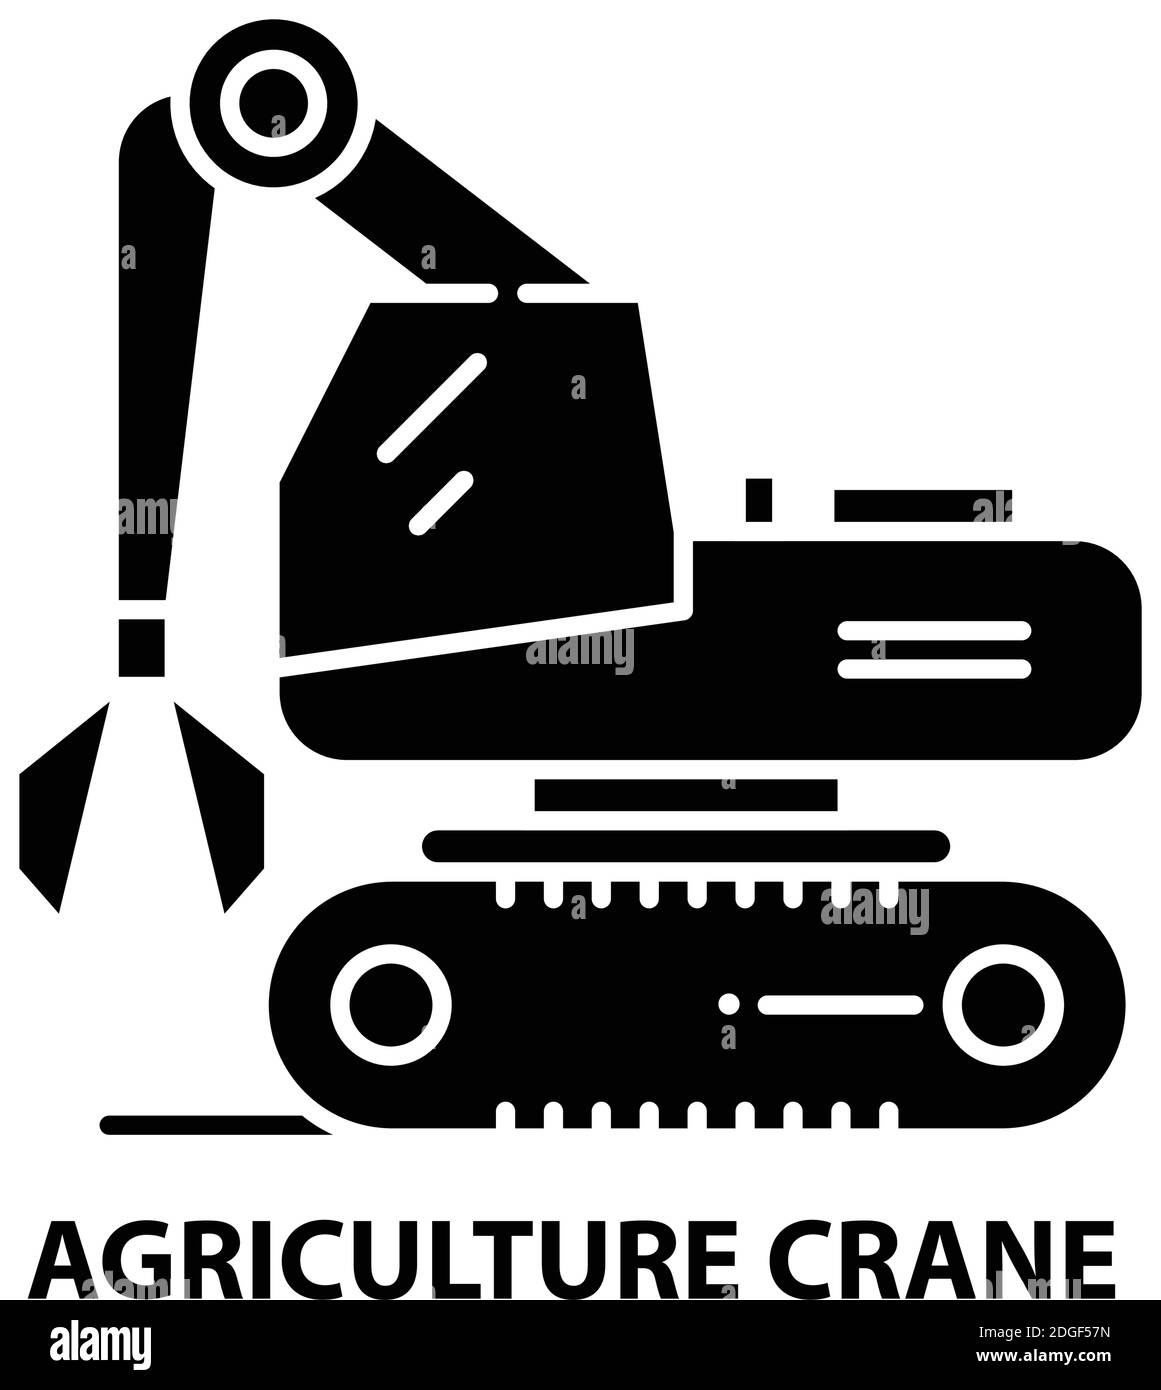 agriculture crane icon, black vector sign with editable strokes, concept illustration Stock Vector